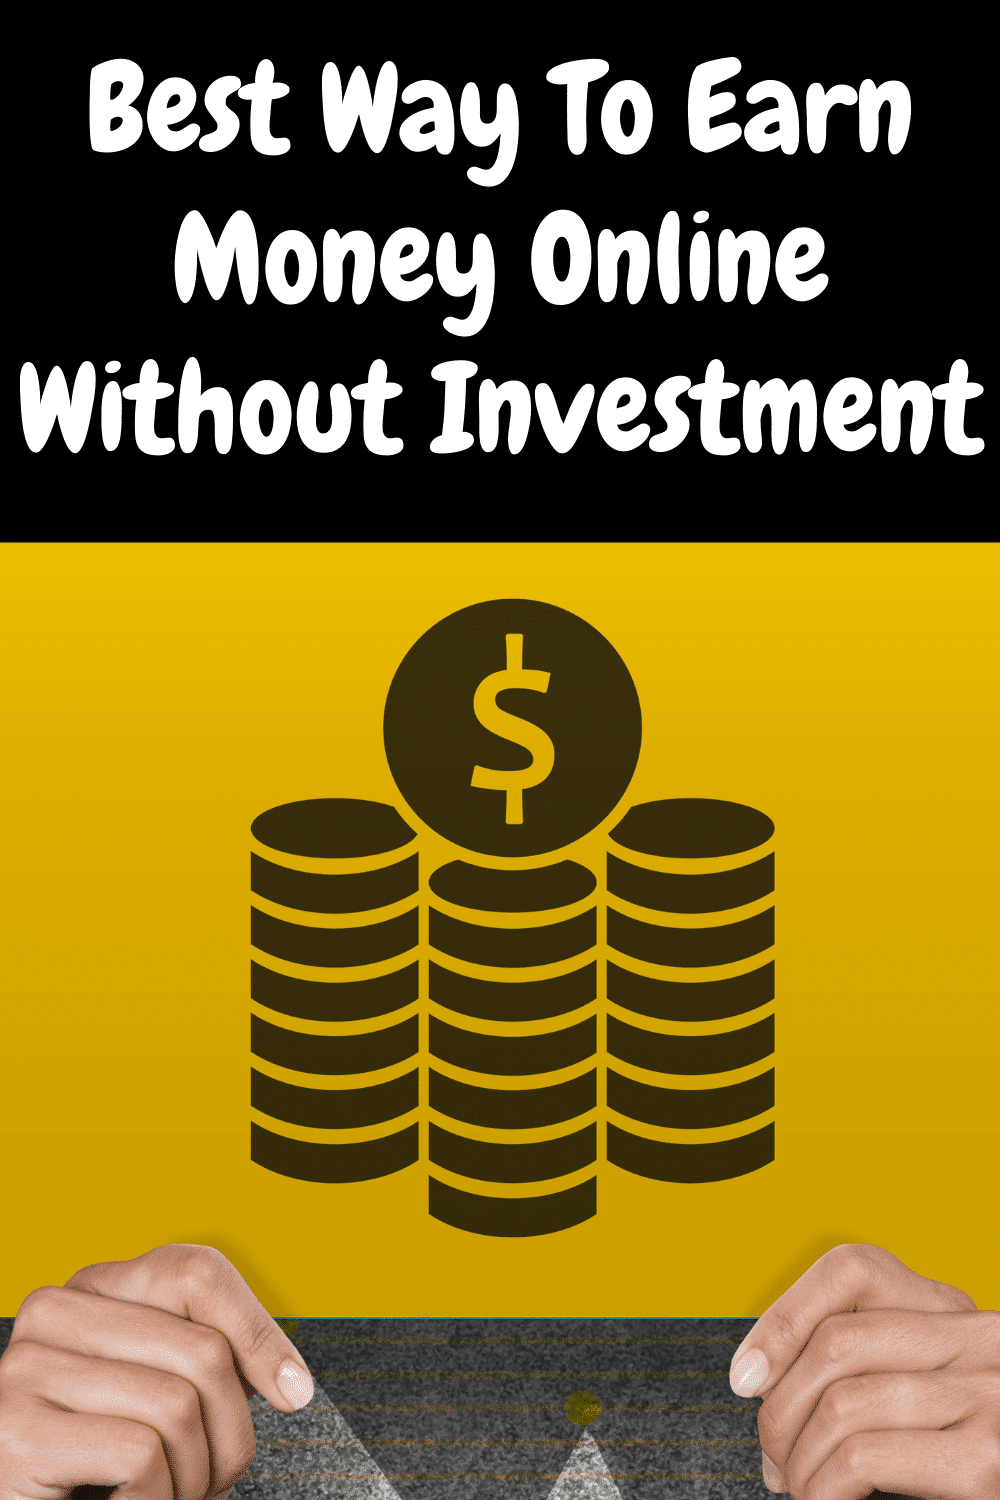 Best Way To Earn Money Online Without Investment